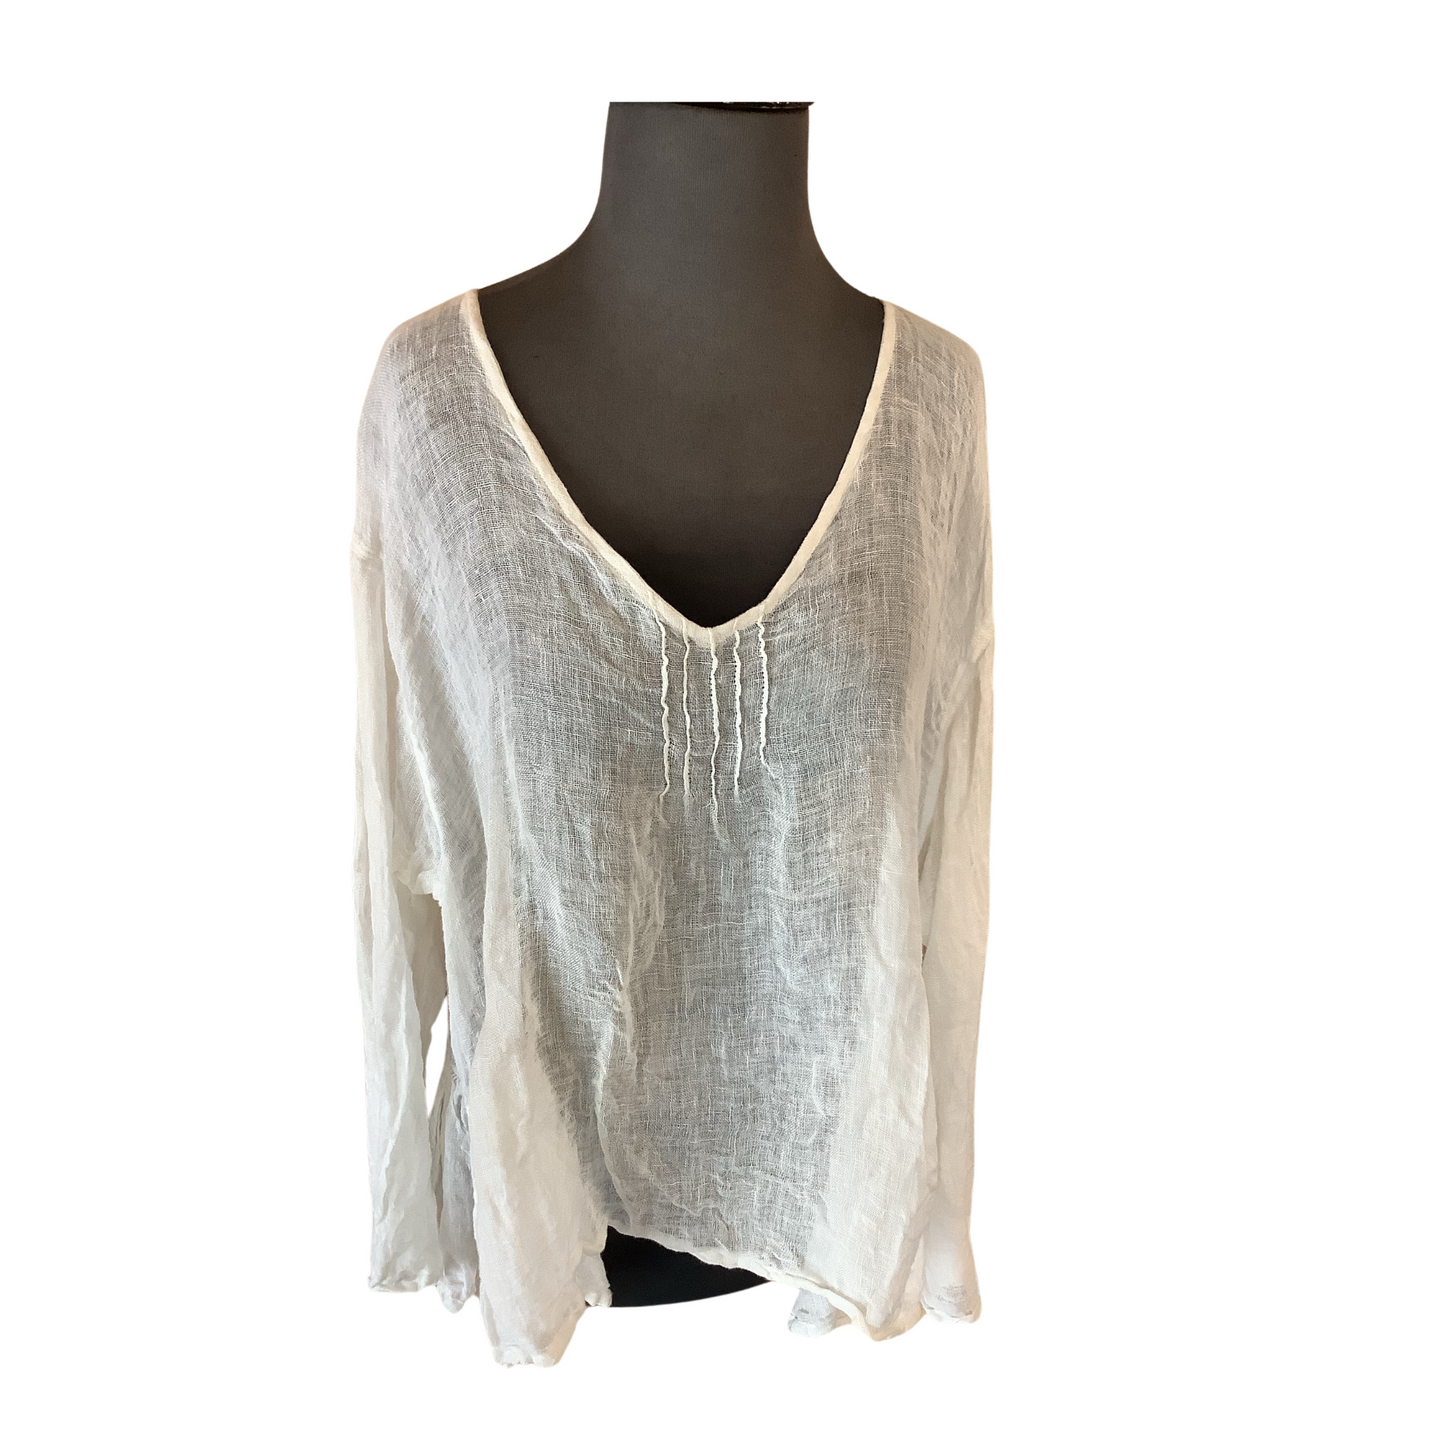 This long sleeve linen top features lightweight material for a breathable, summery look, plus a sheer finish for a stylish, contemporary edge. The long sleeves provide the perfect amount of coverage, while the cream color pairs well with most other wardrobe items.